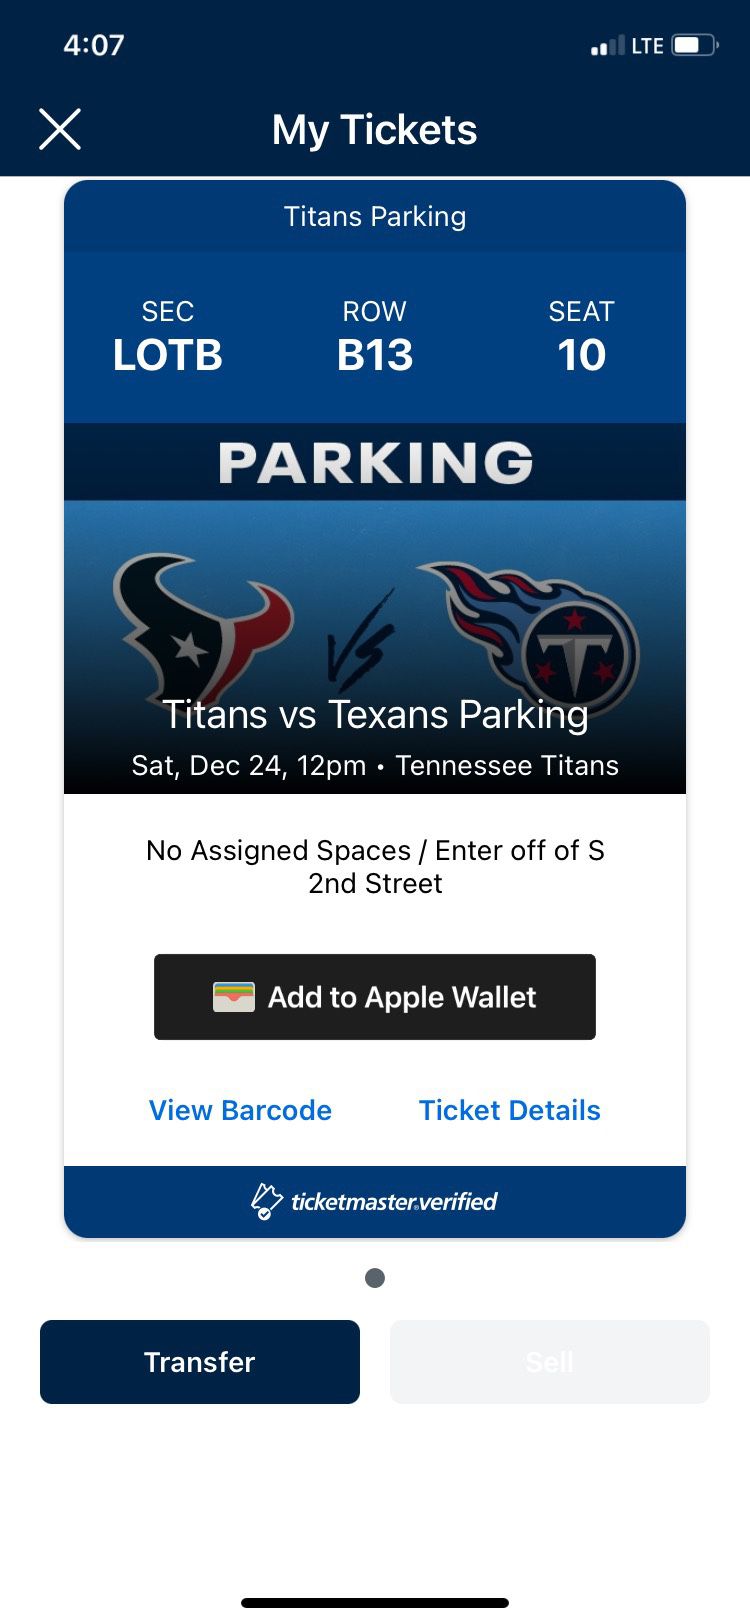 Titans Vs Texans 12/24/22 CLUB LEVEL (DO NOT ASK IF I HAVE TIX TO OTHER GAMES. USE COMMON SENSE )